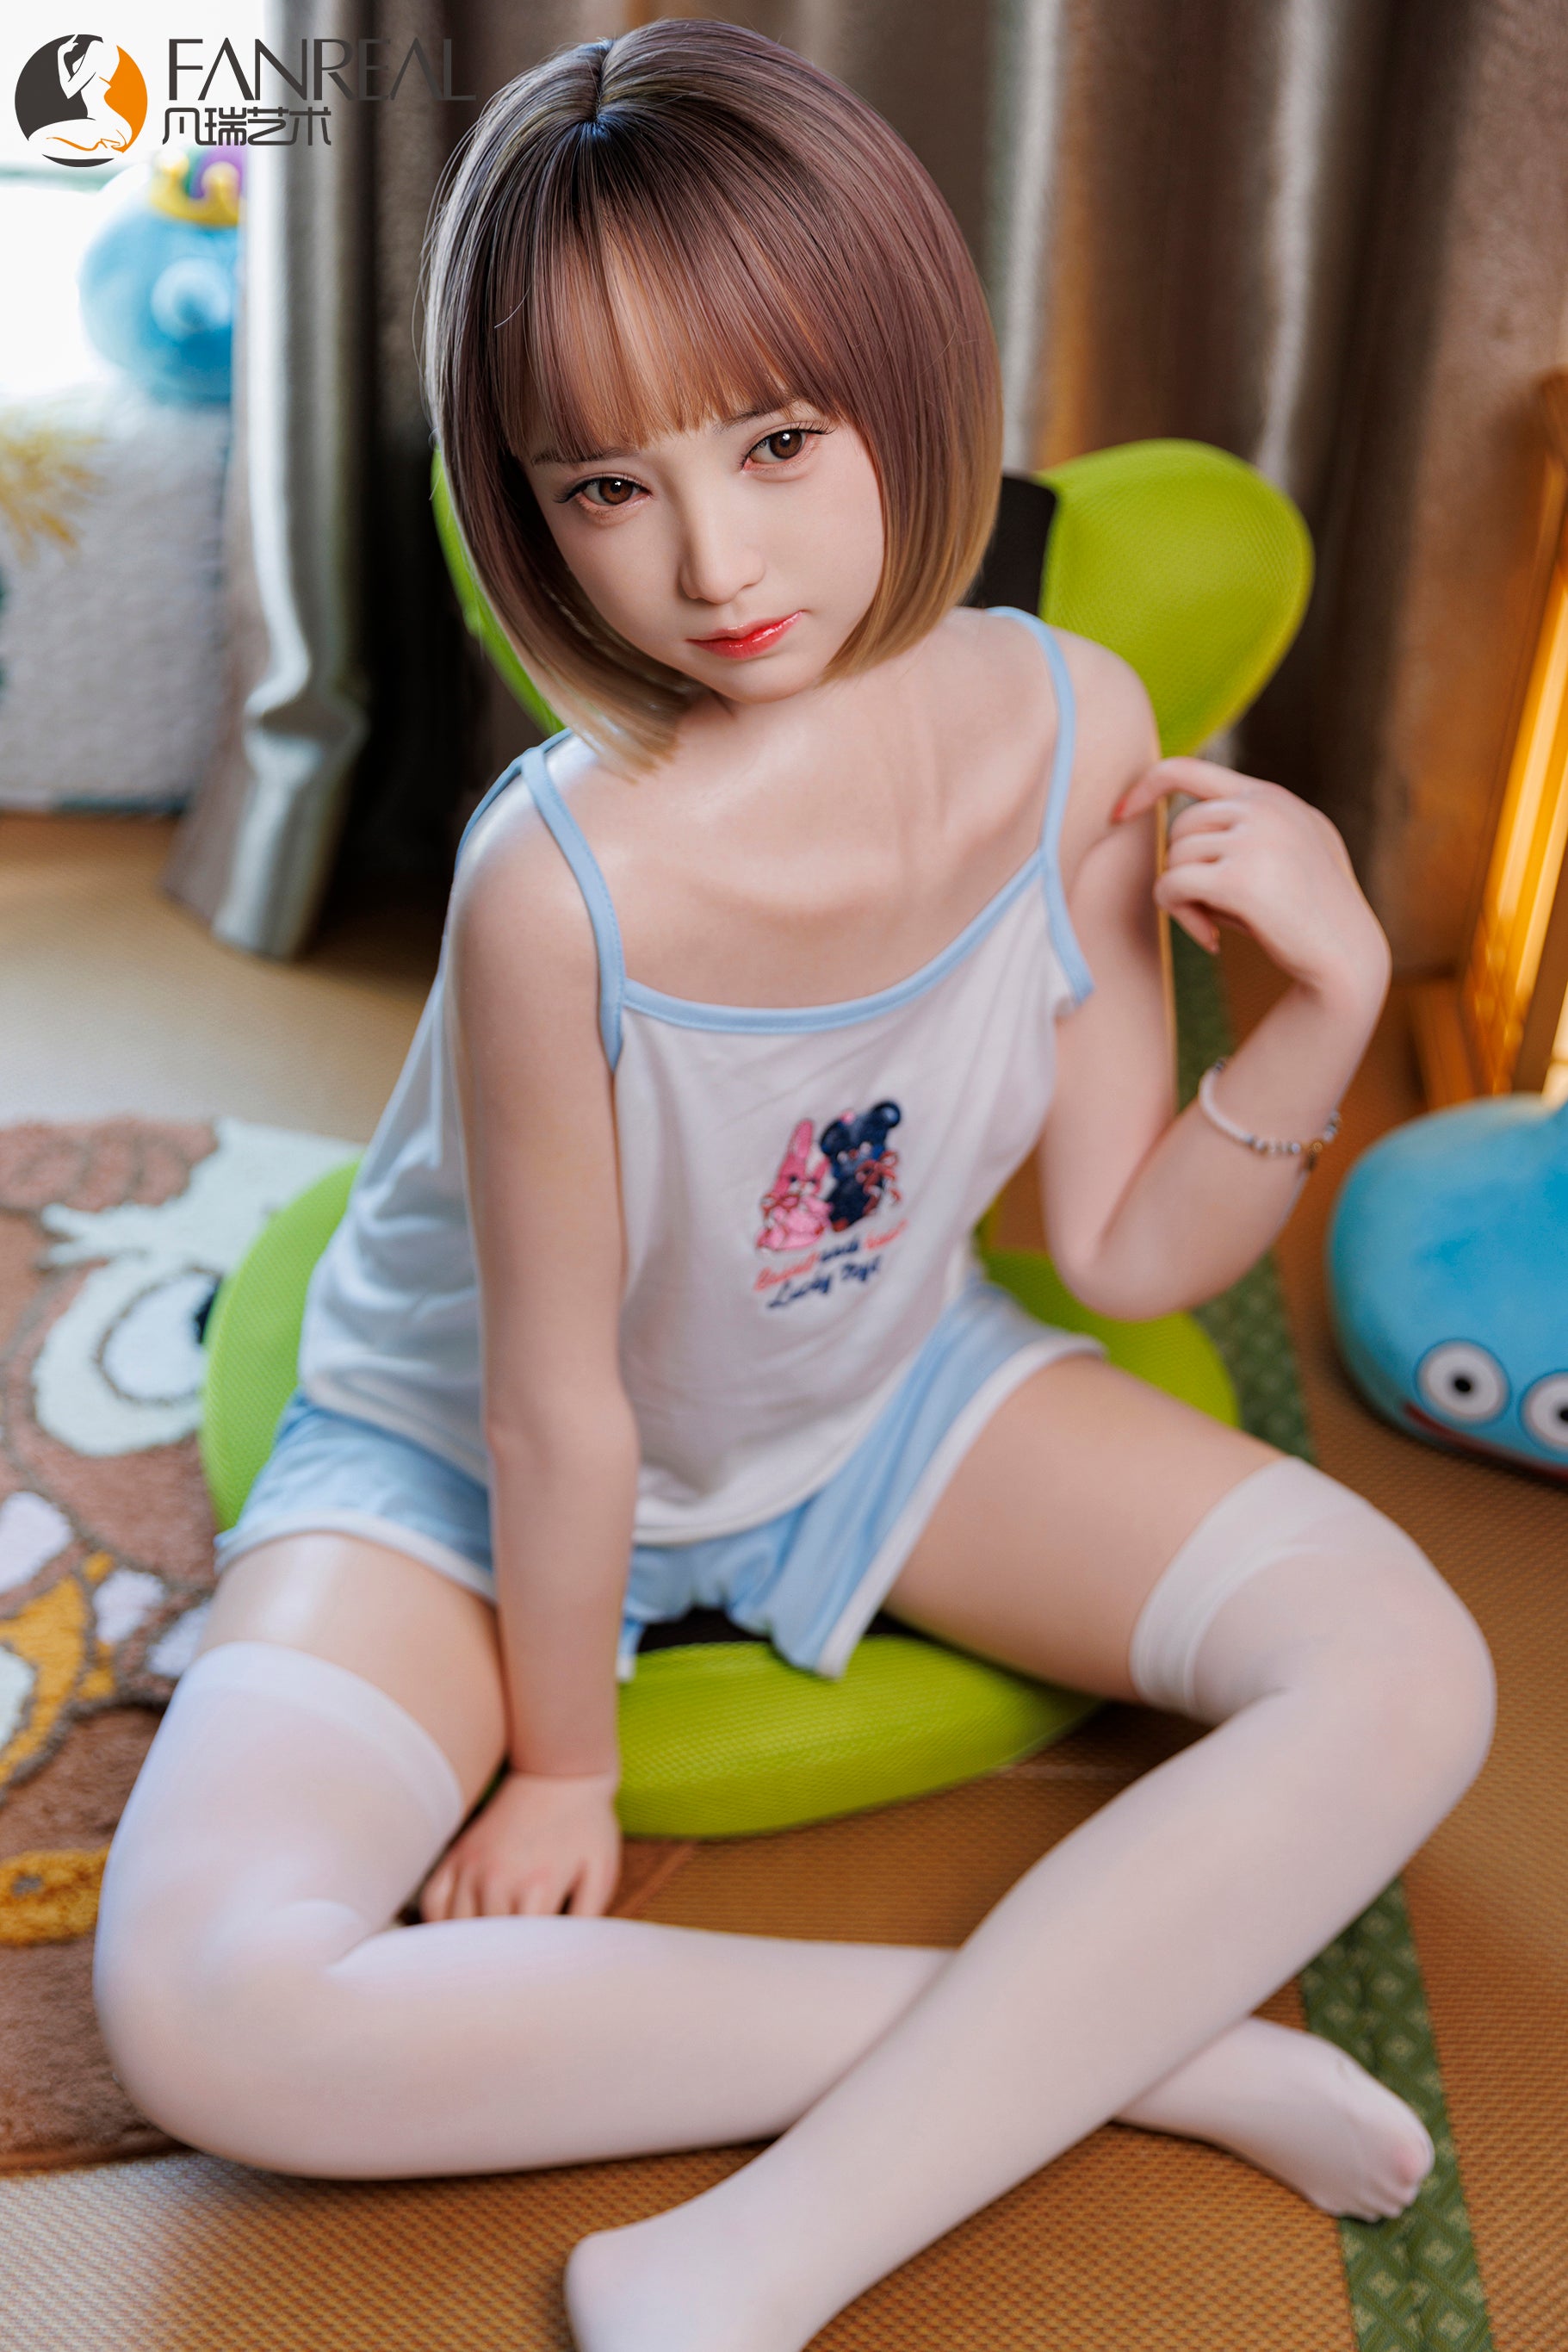 FANREAL DOLL 153 CM B Silicone - Mo | Buy Sex Dolls at DOLLS ACTUALLY